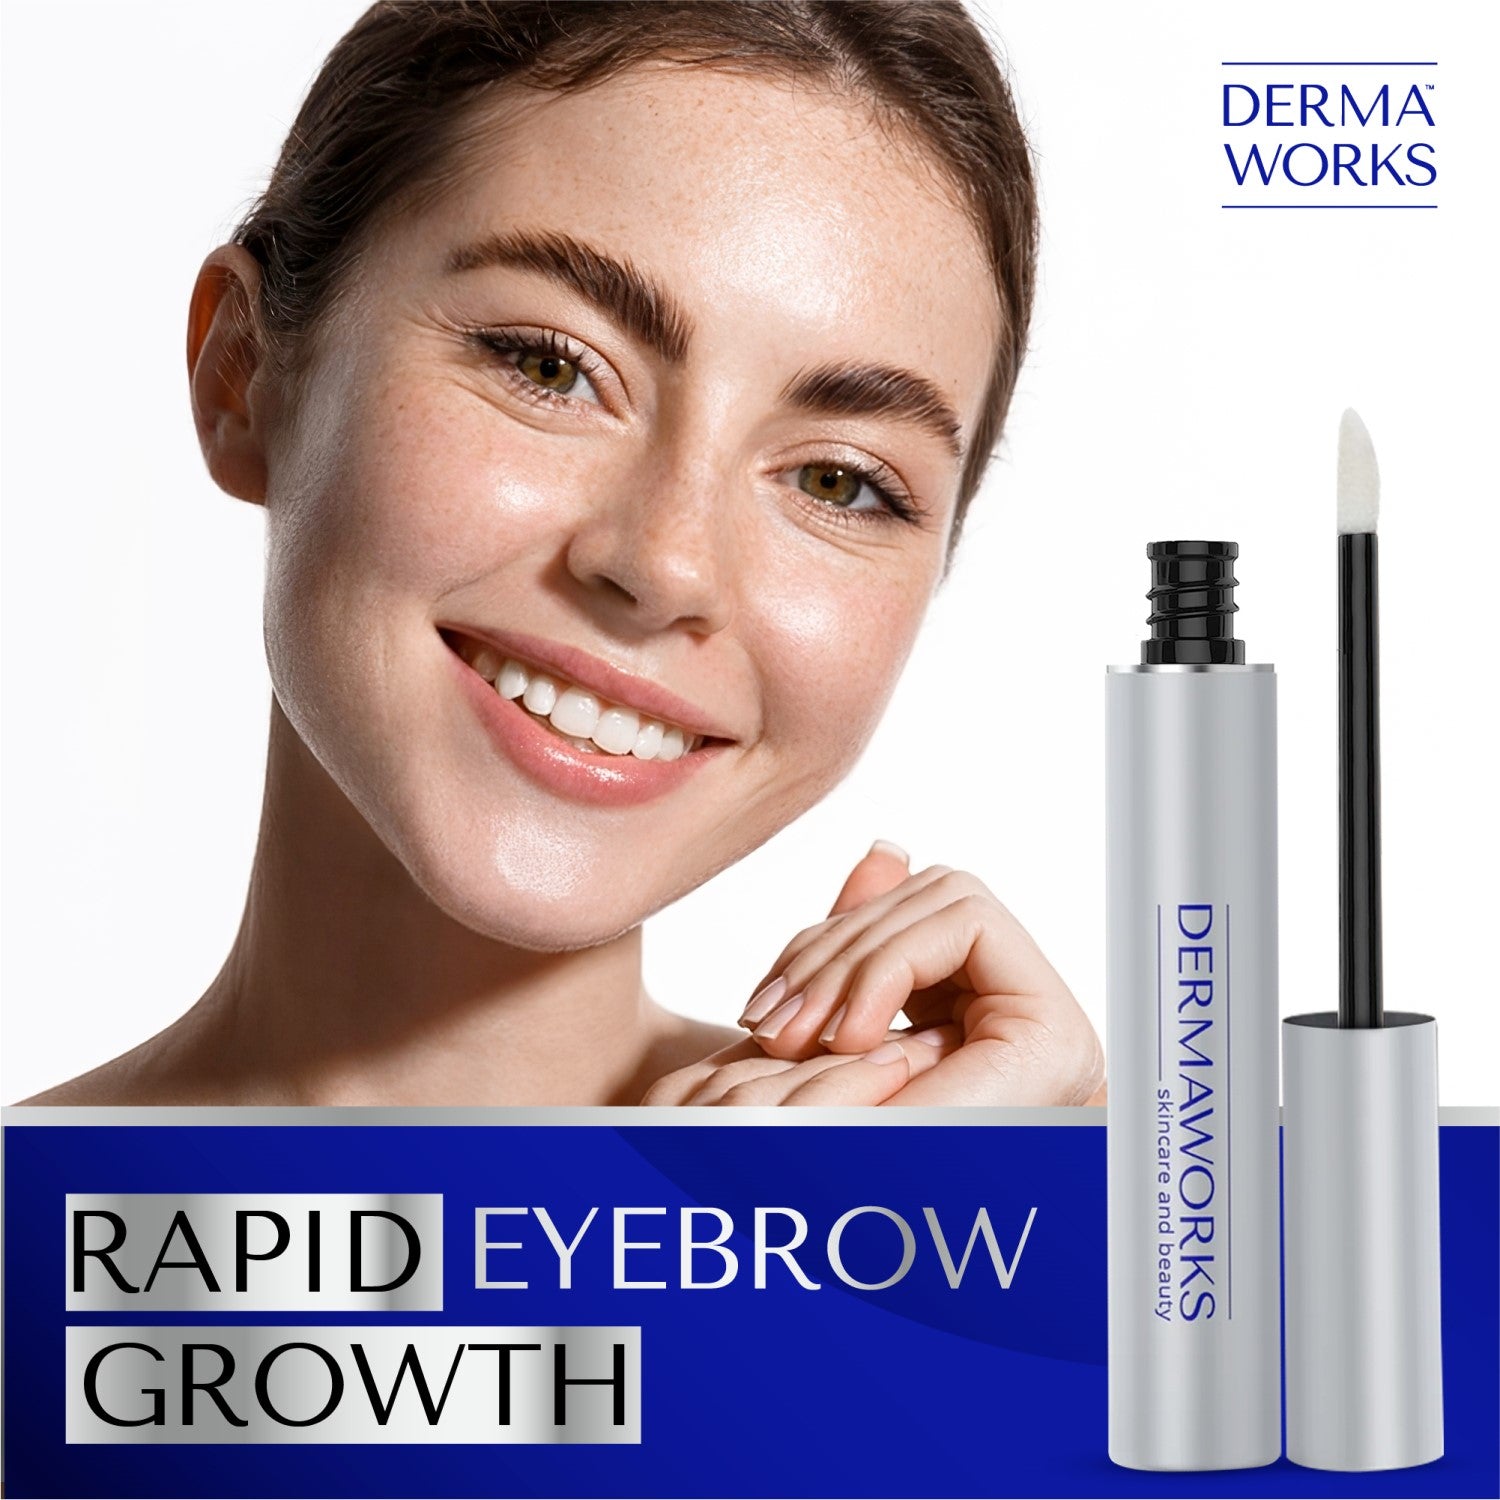 Grow fuller, thicker, more shapely eyebrows with Dermaworks brow enhancer. It helps stimulate dormant hair follicles and regrow patchy areas.